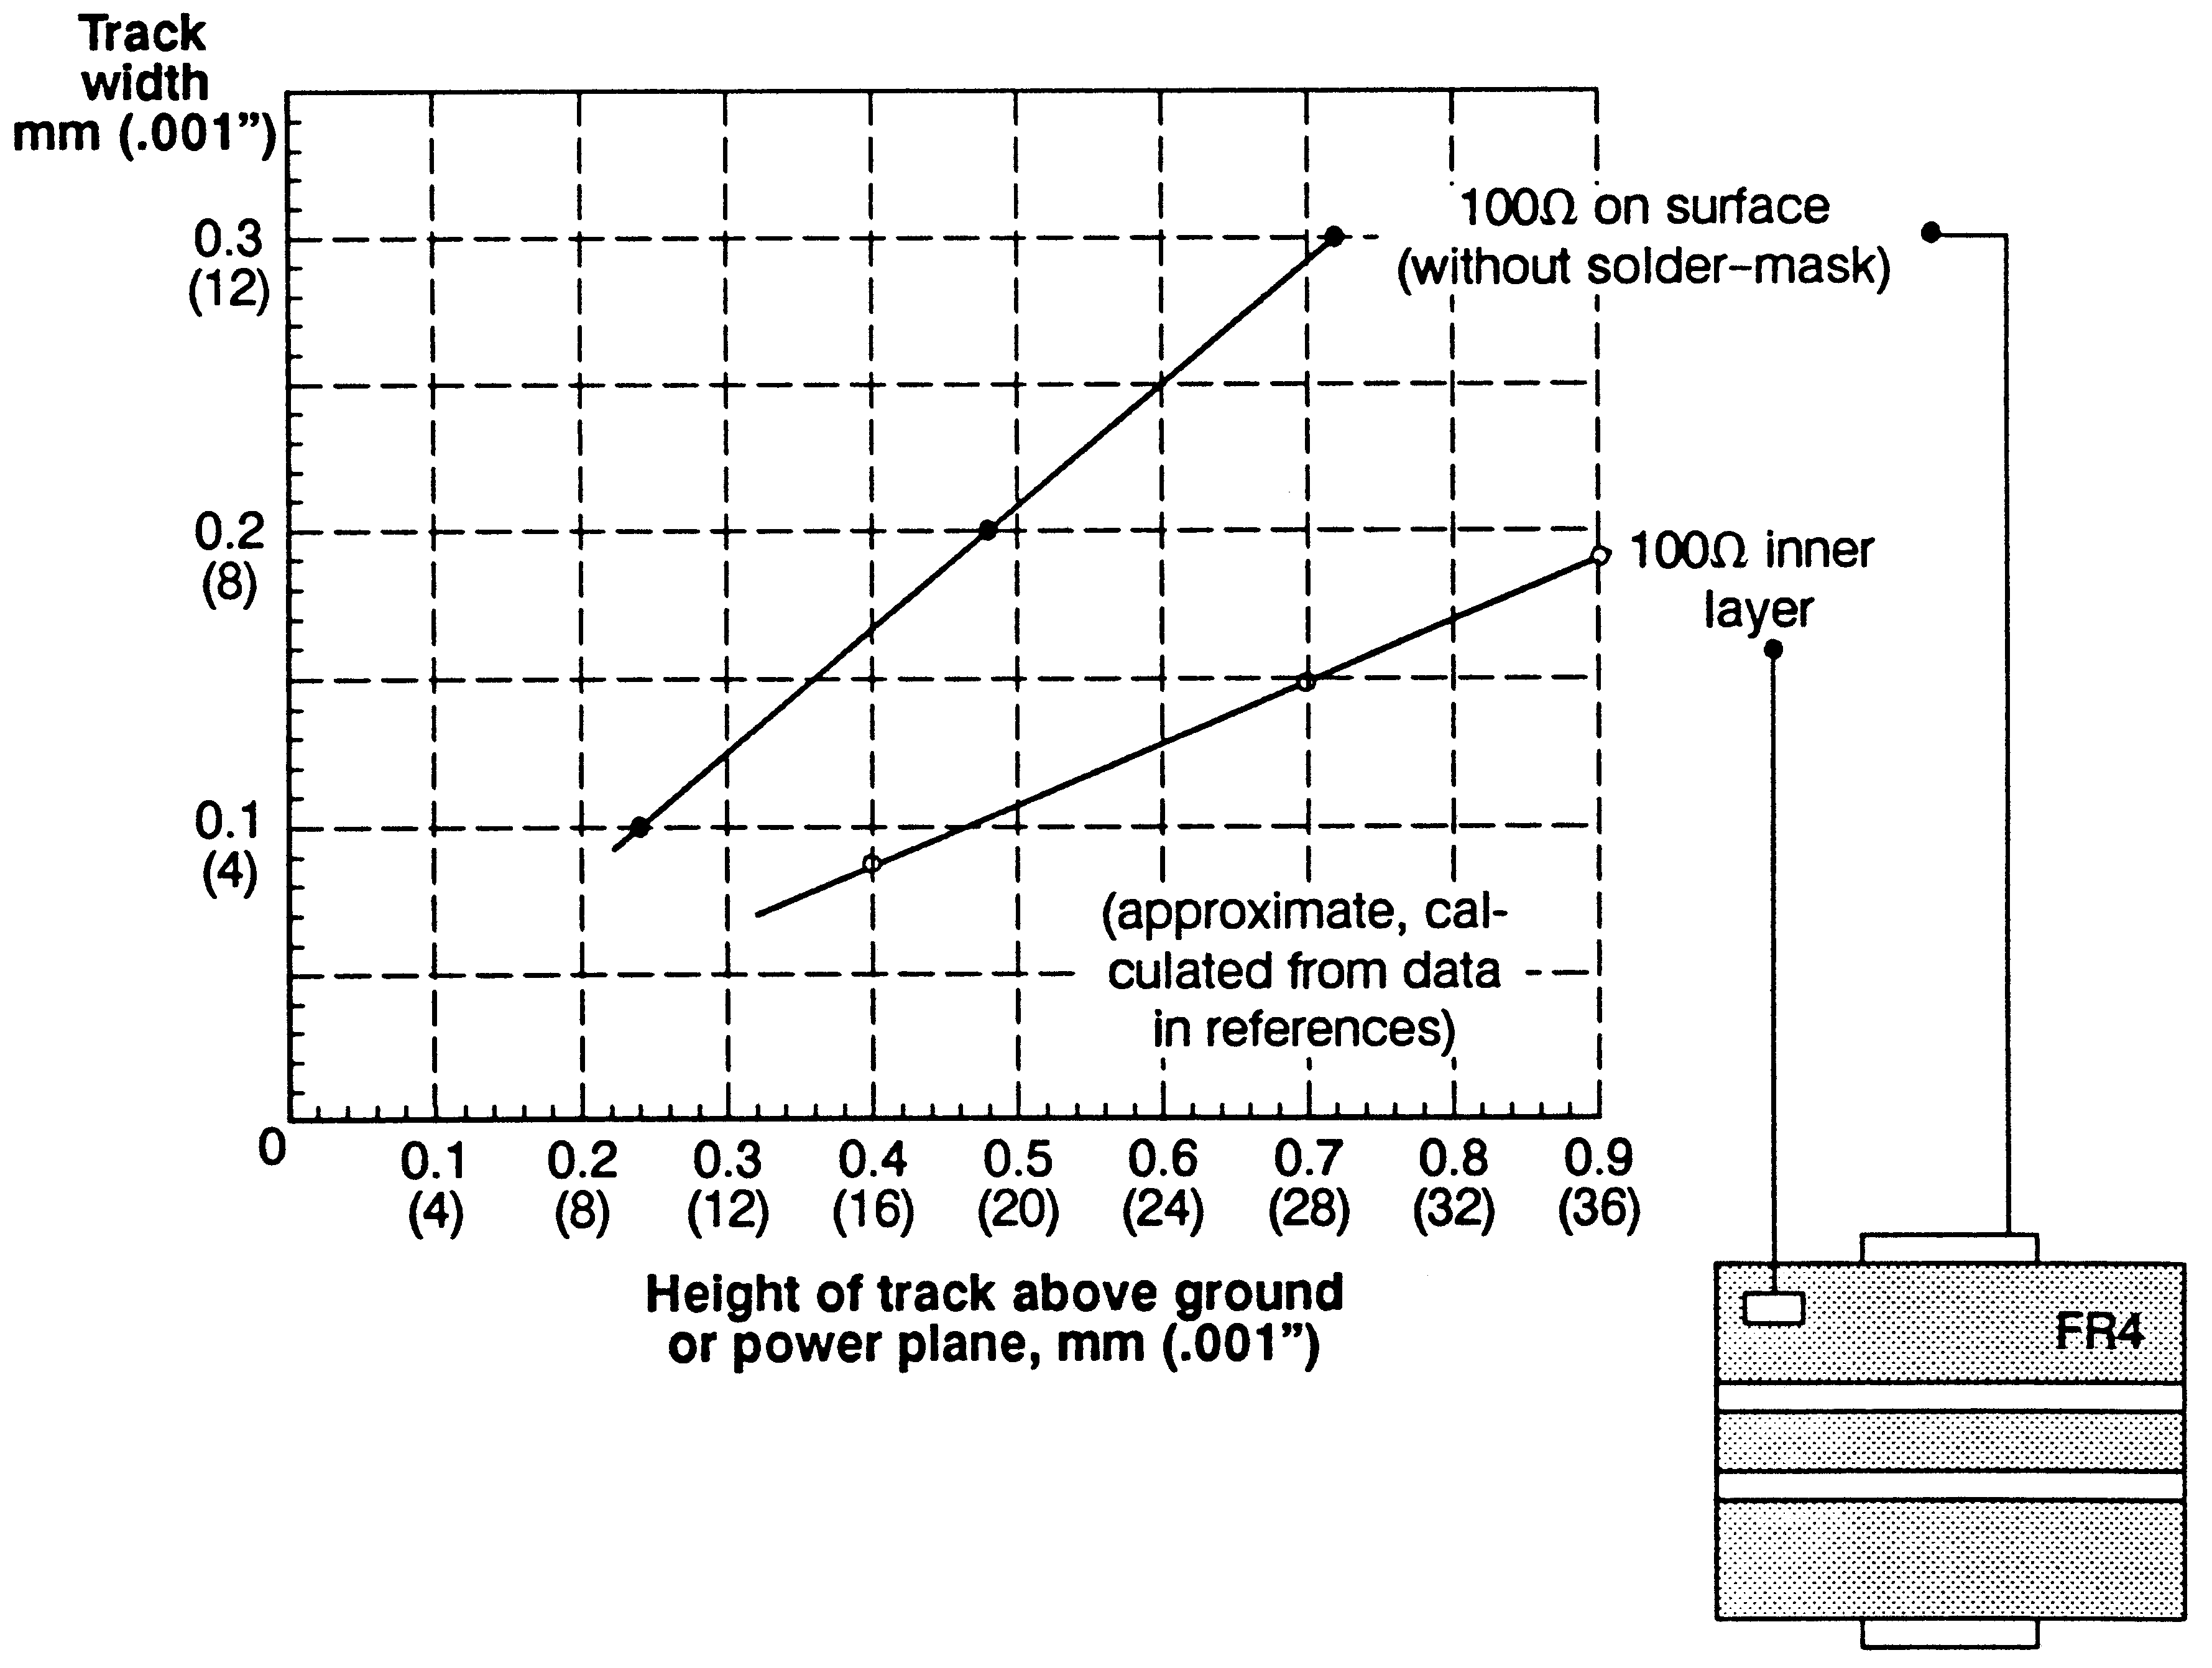 Approximate PCB transmission line impedance for FR4 laminate